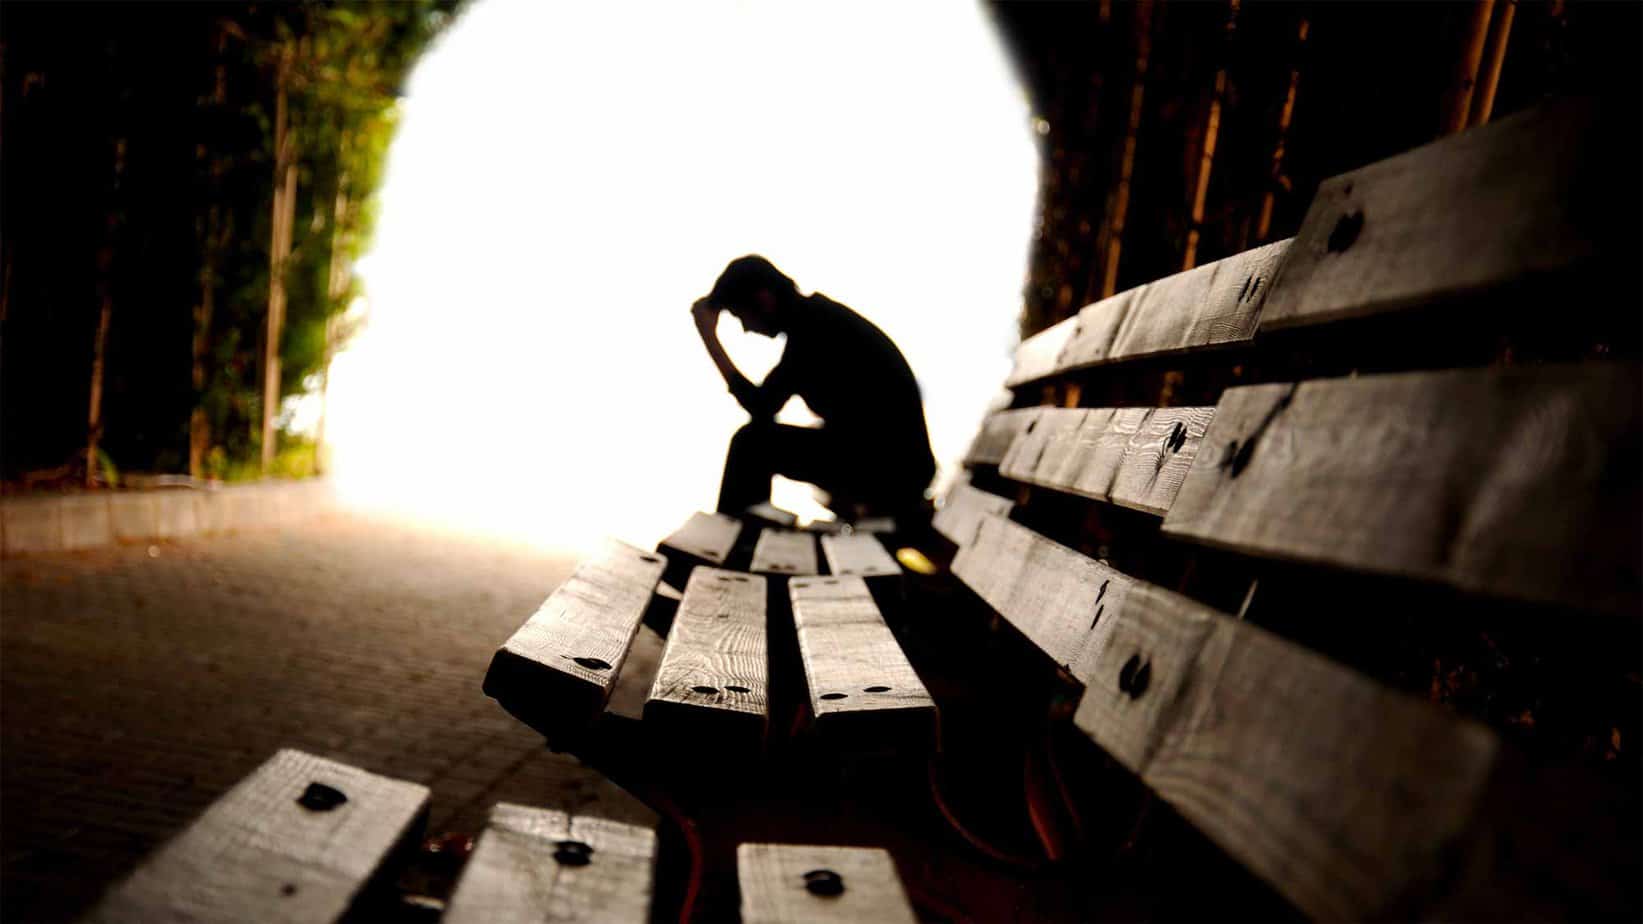 Man holding his head in anguish outside on bench